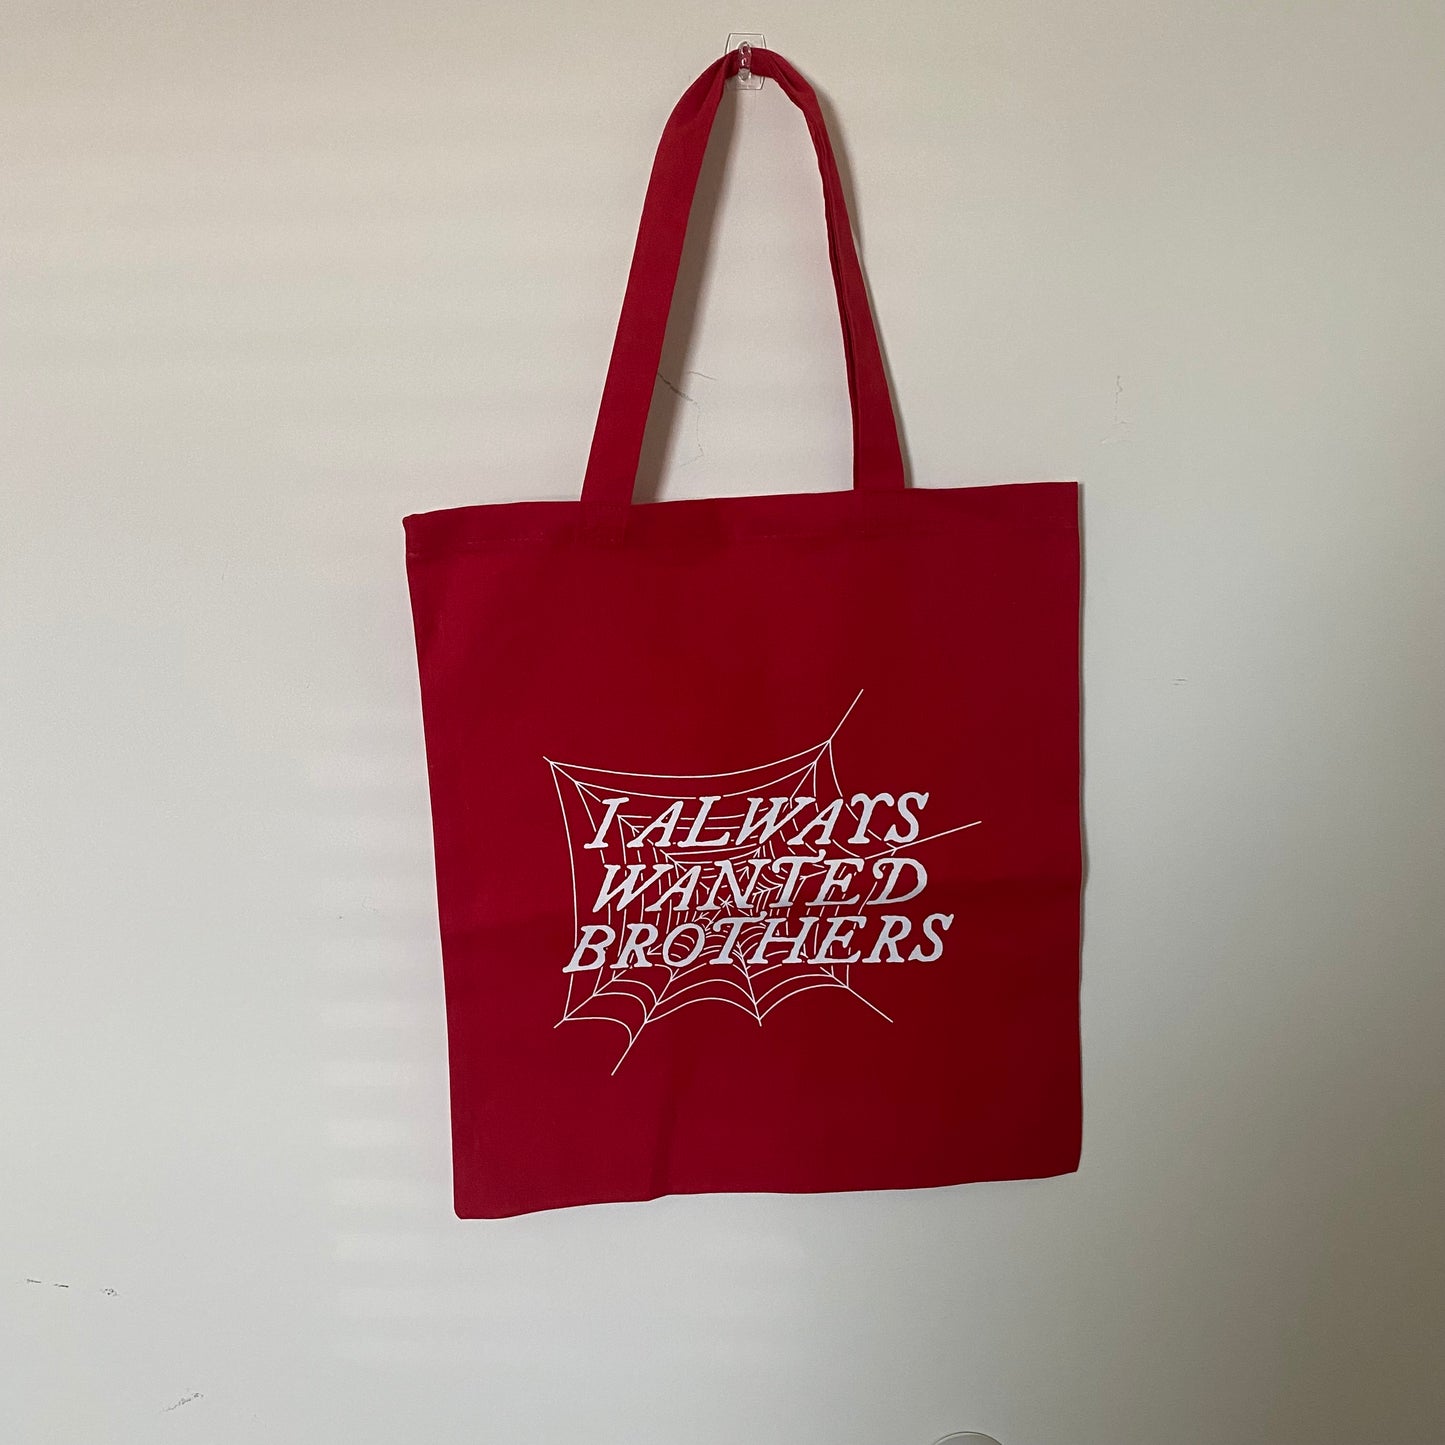 The Brothers Tote